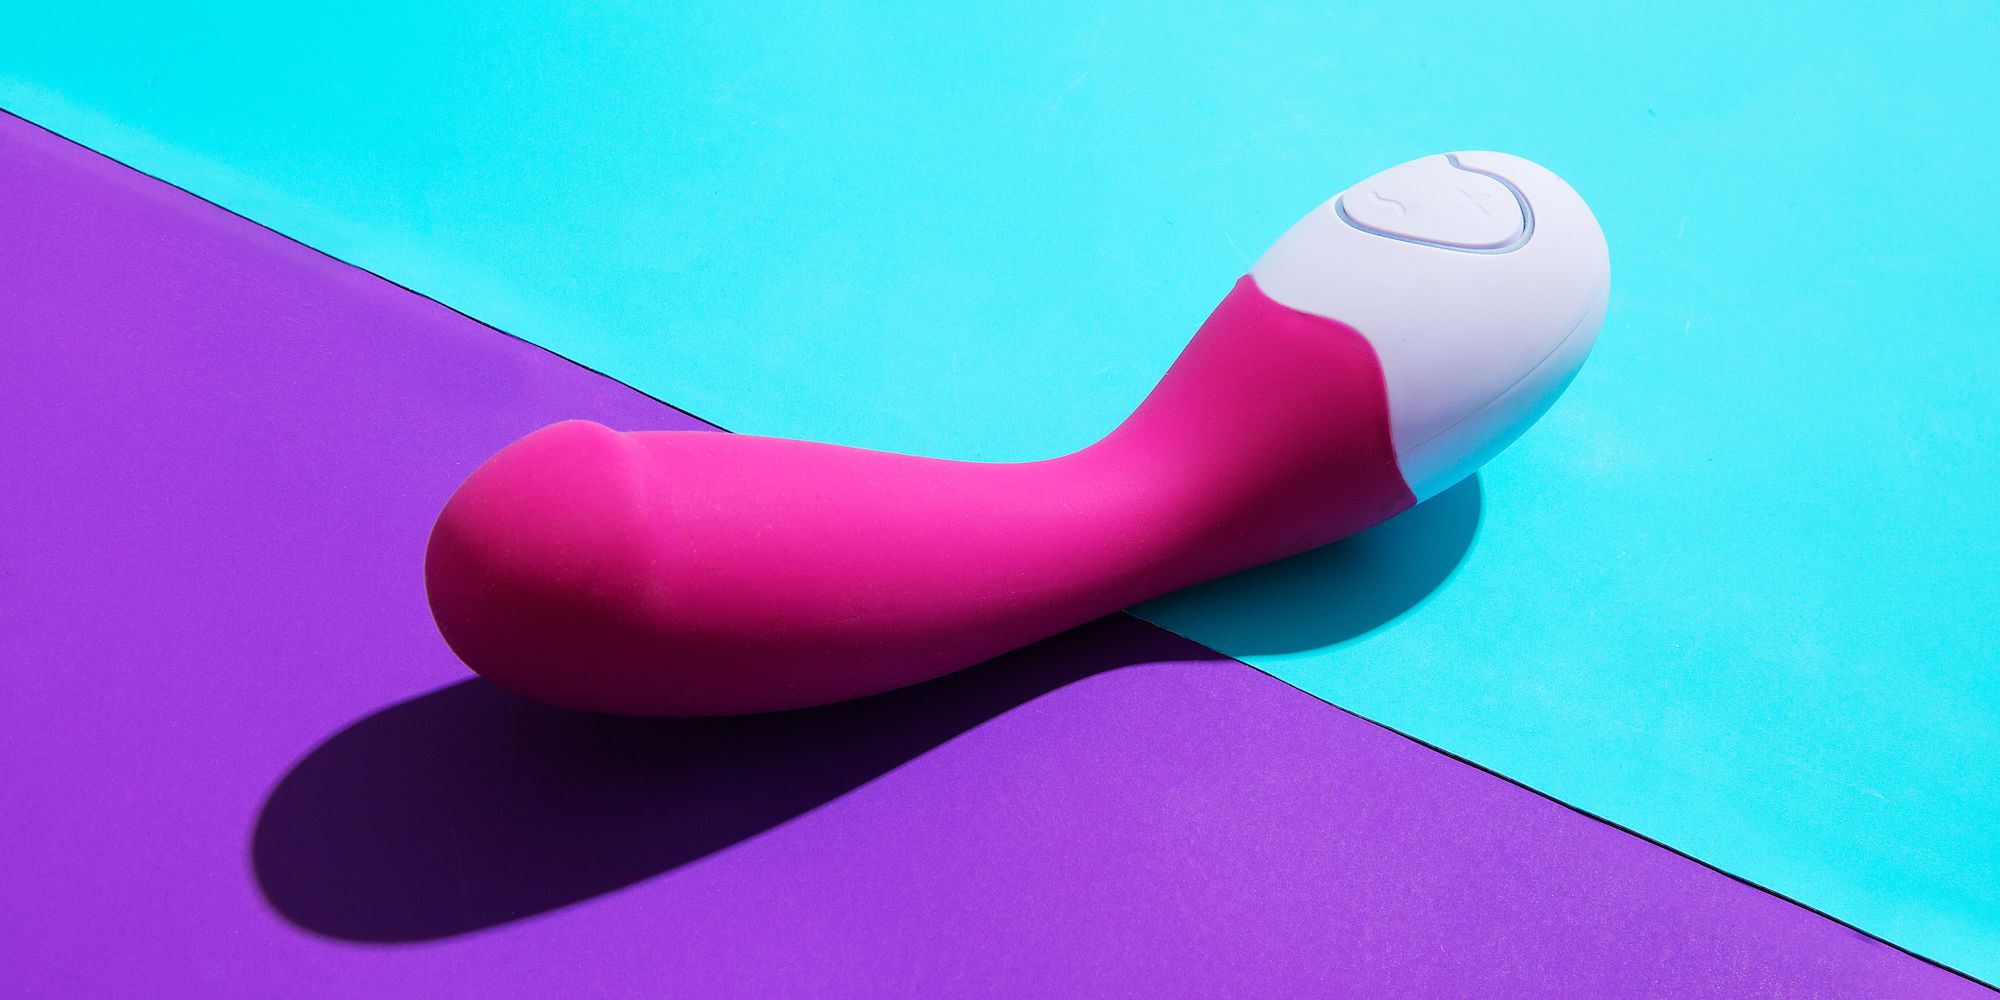 How Does Using a Vibrator Affect Your Body? pic picture